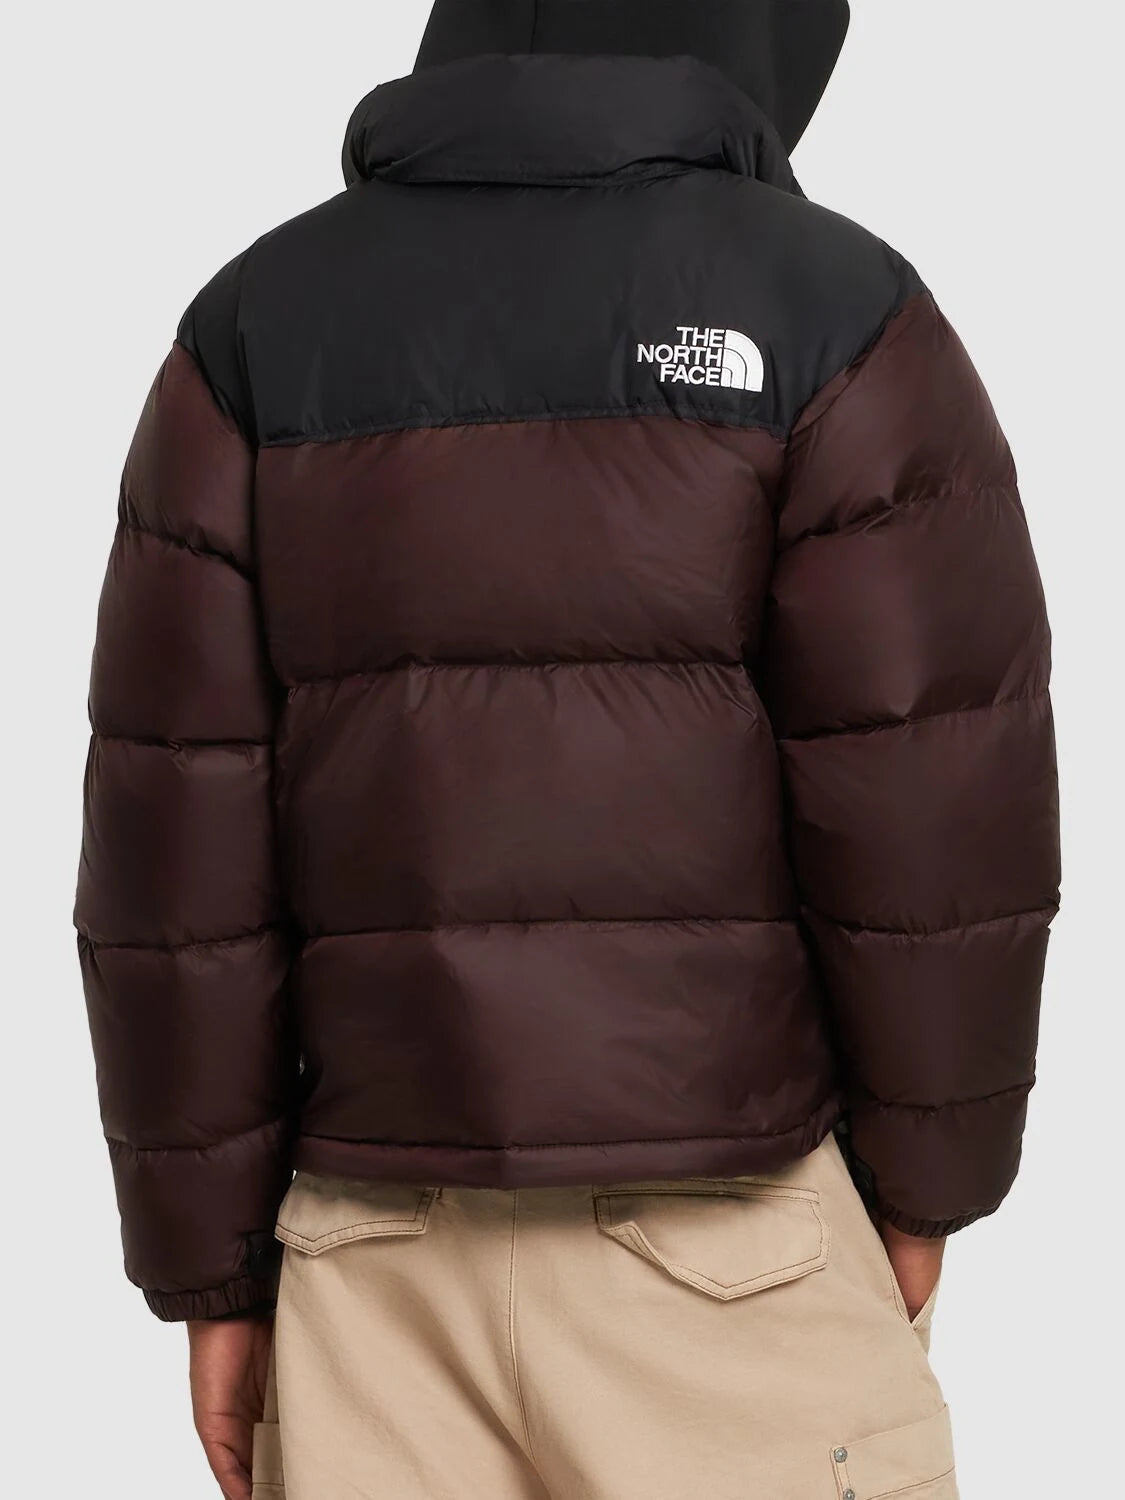 The North Face 1996 Retro Nuptse down puffer jacket in brown and black